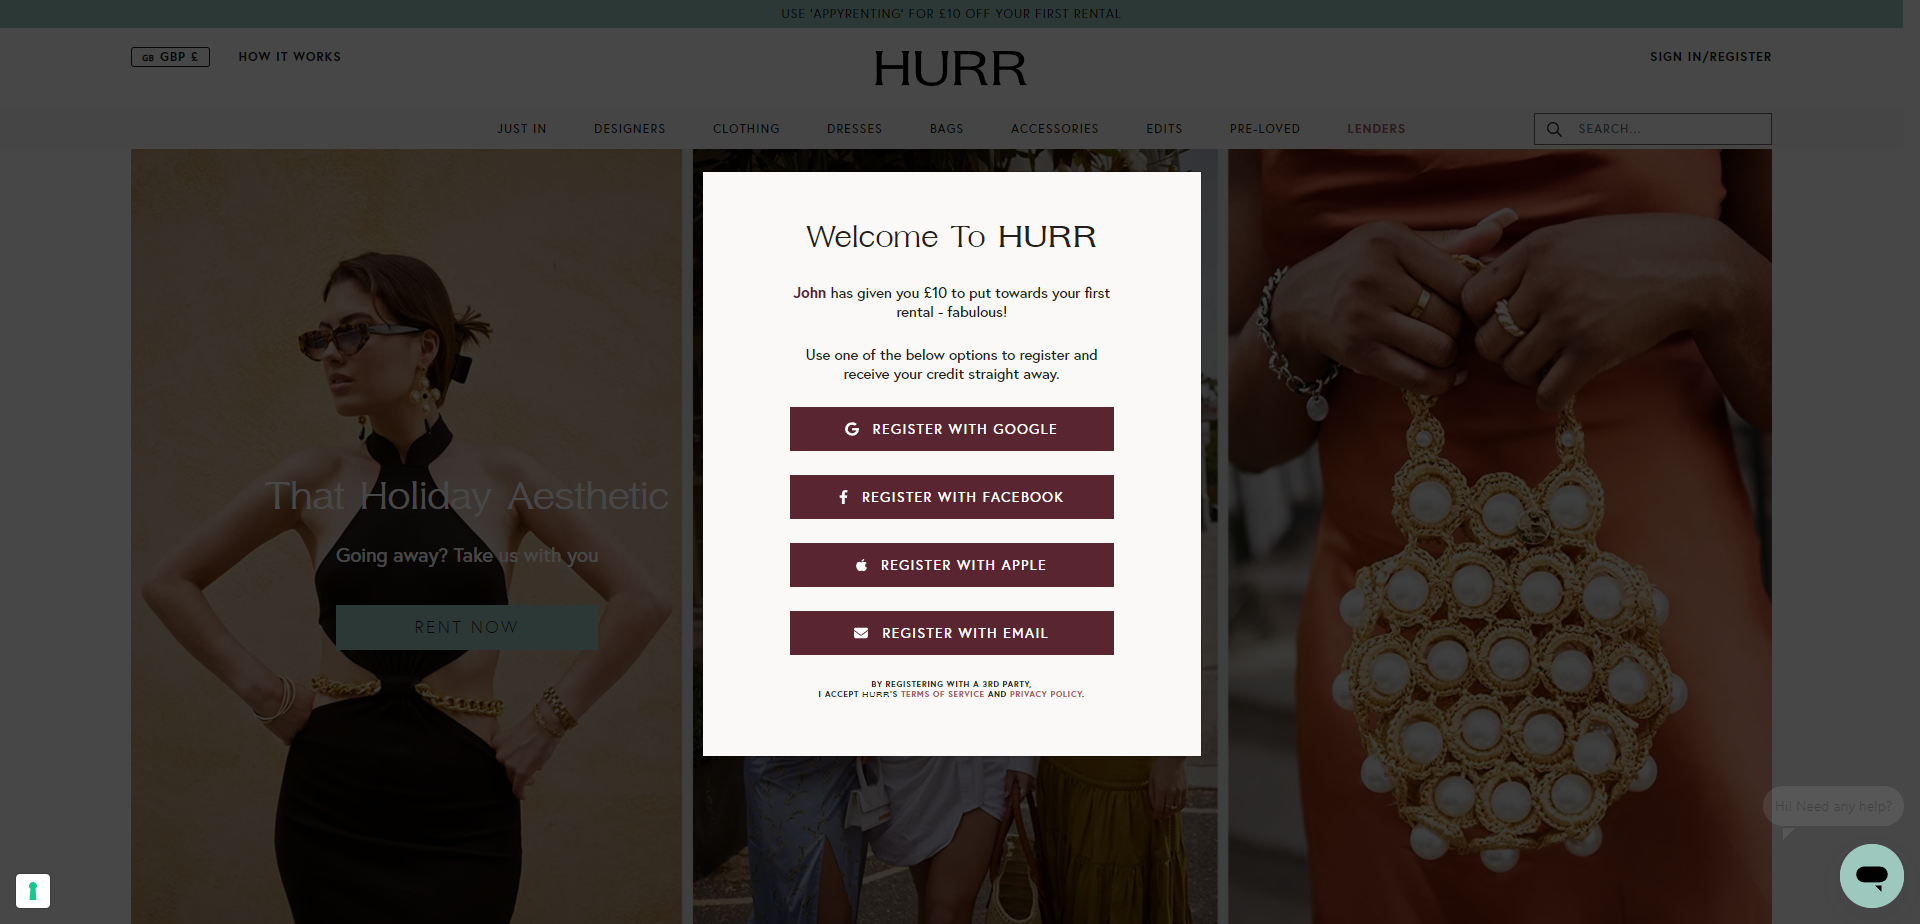 Referral Landing Page for Hurr Collective